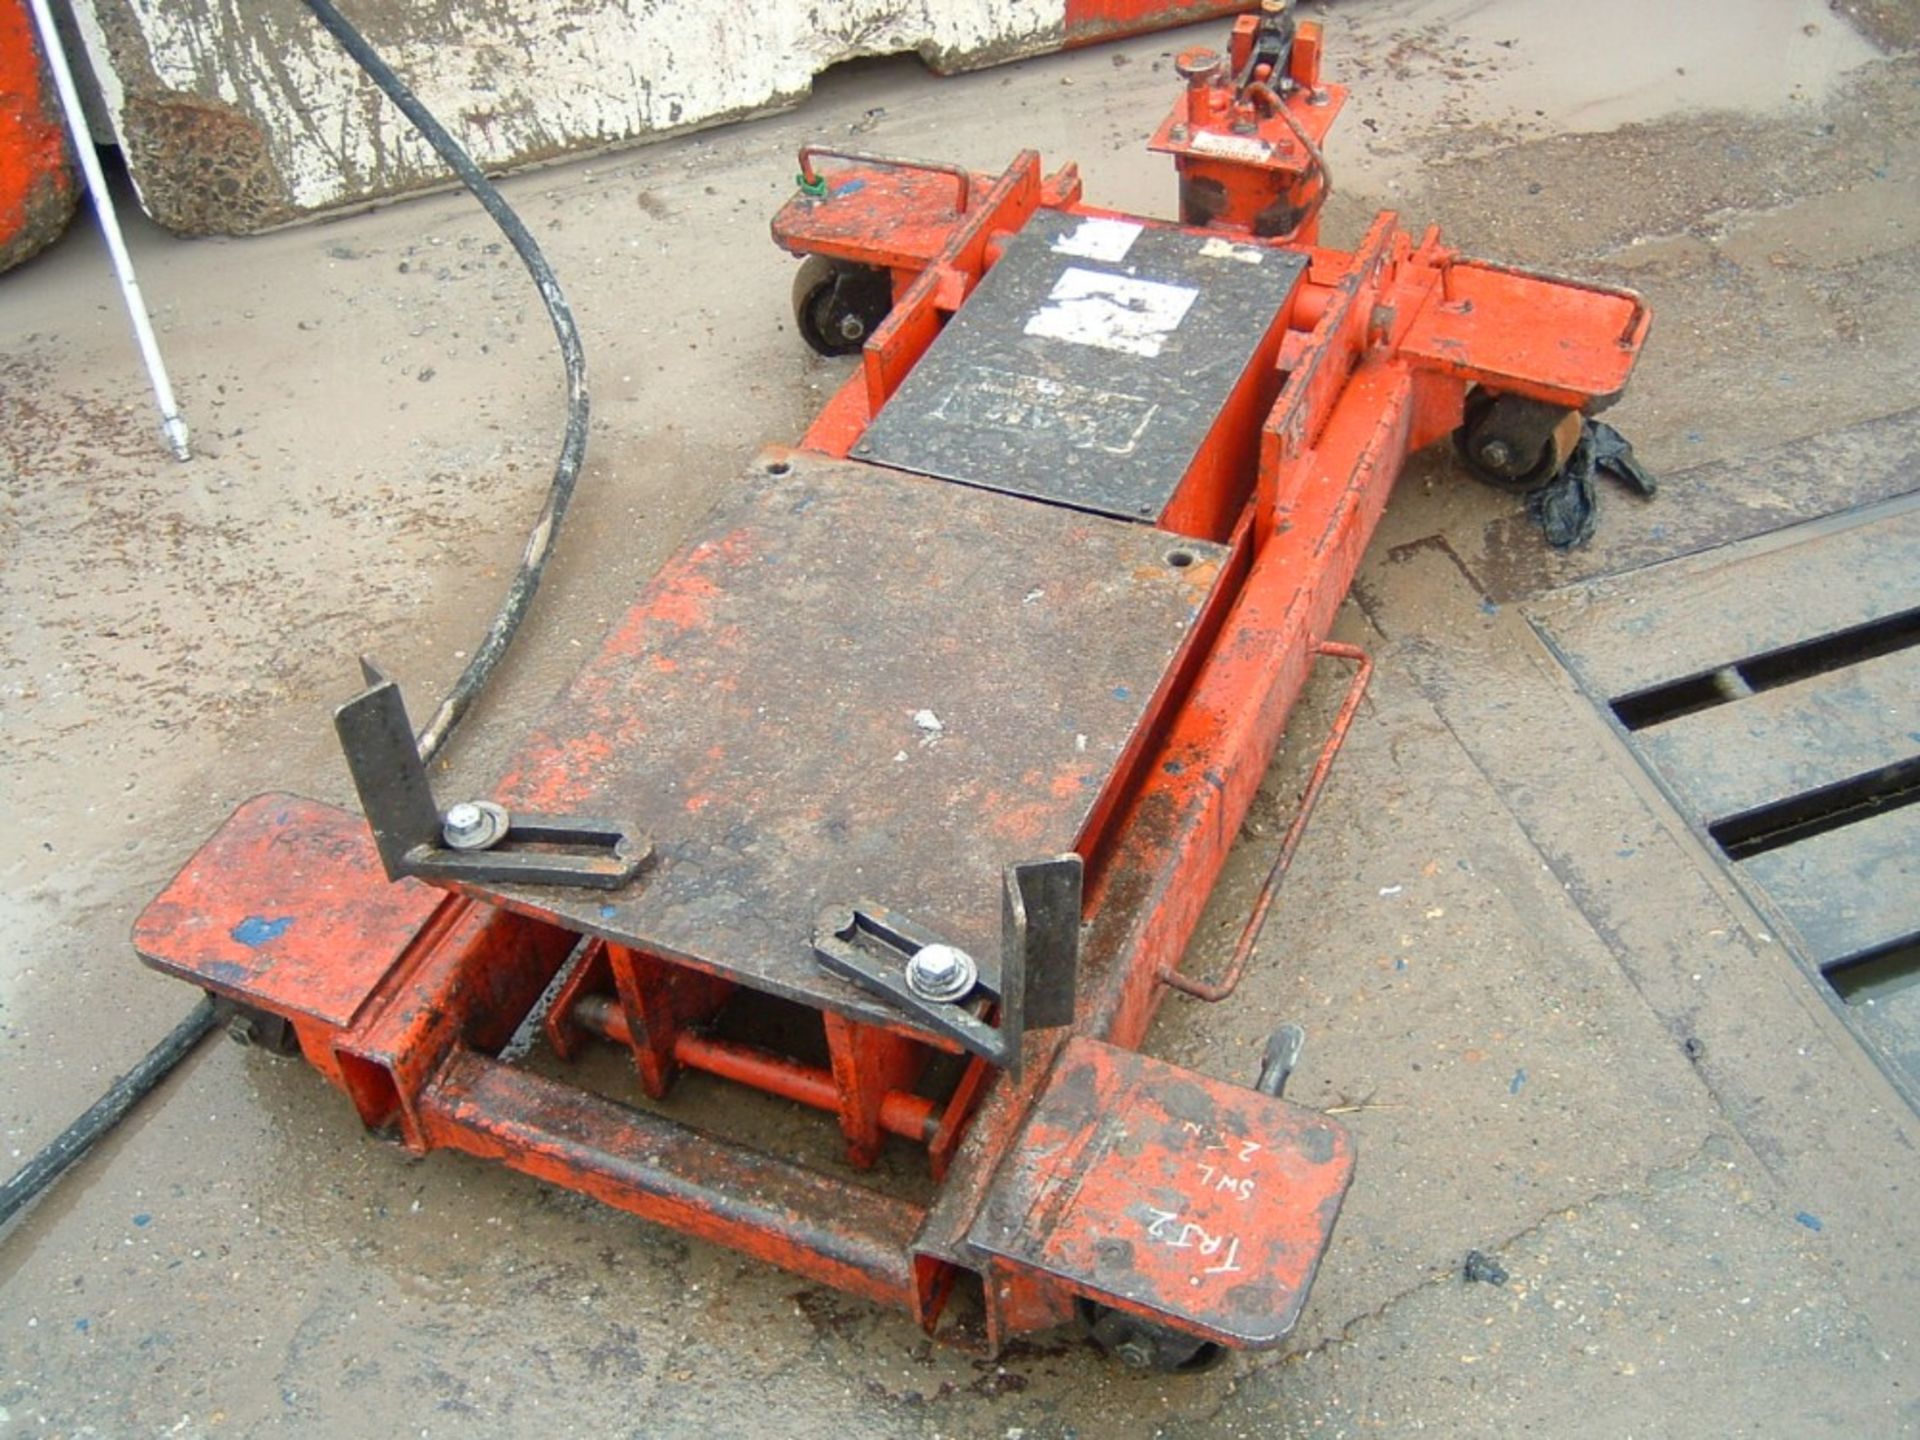 LARGE SIZED TRANSMISSION JACK DESCRIBED AS BEING IN USE.